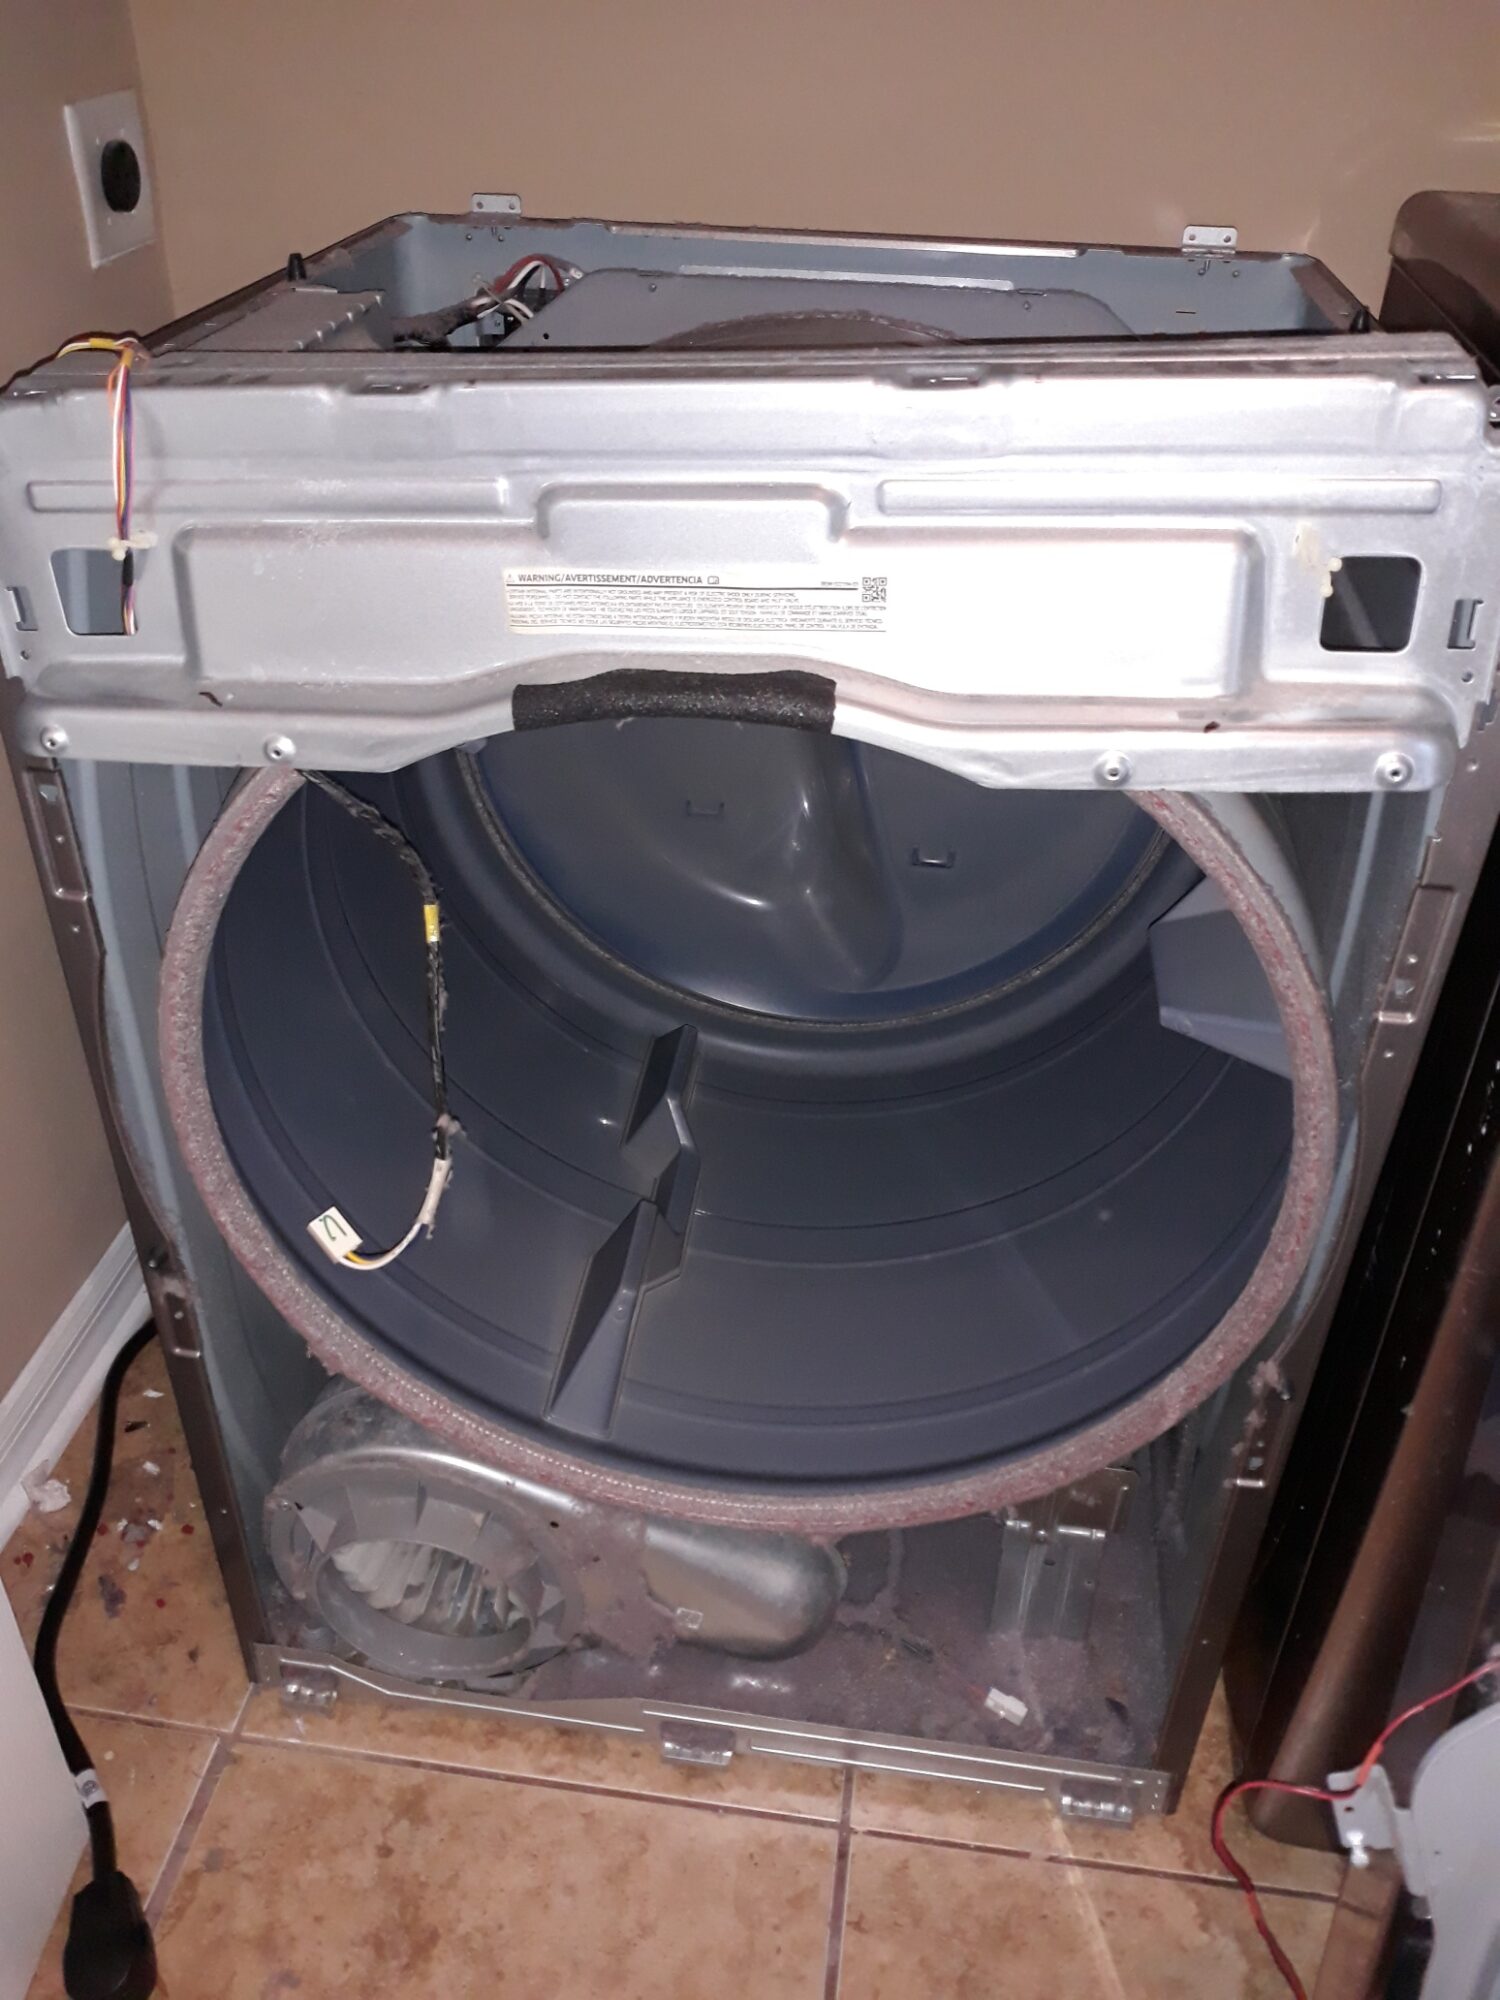 appliance repair dryer repair repaired by replacement of the failed heating element and internal cleaning of the excessive lint buildup e golf links ave eustis fl 32726